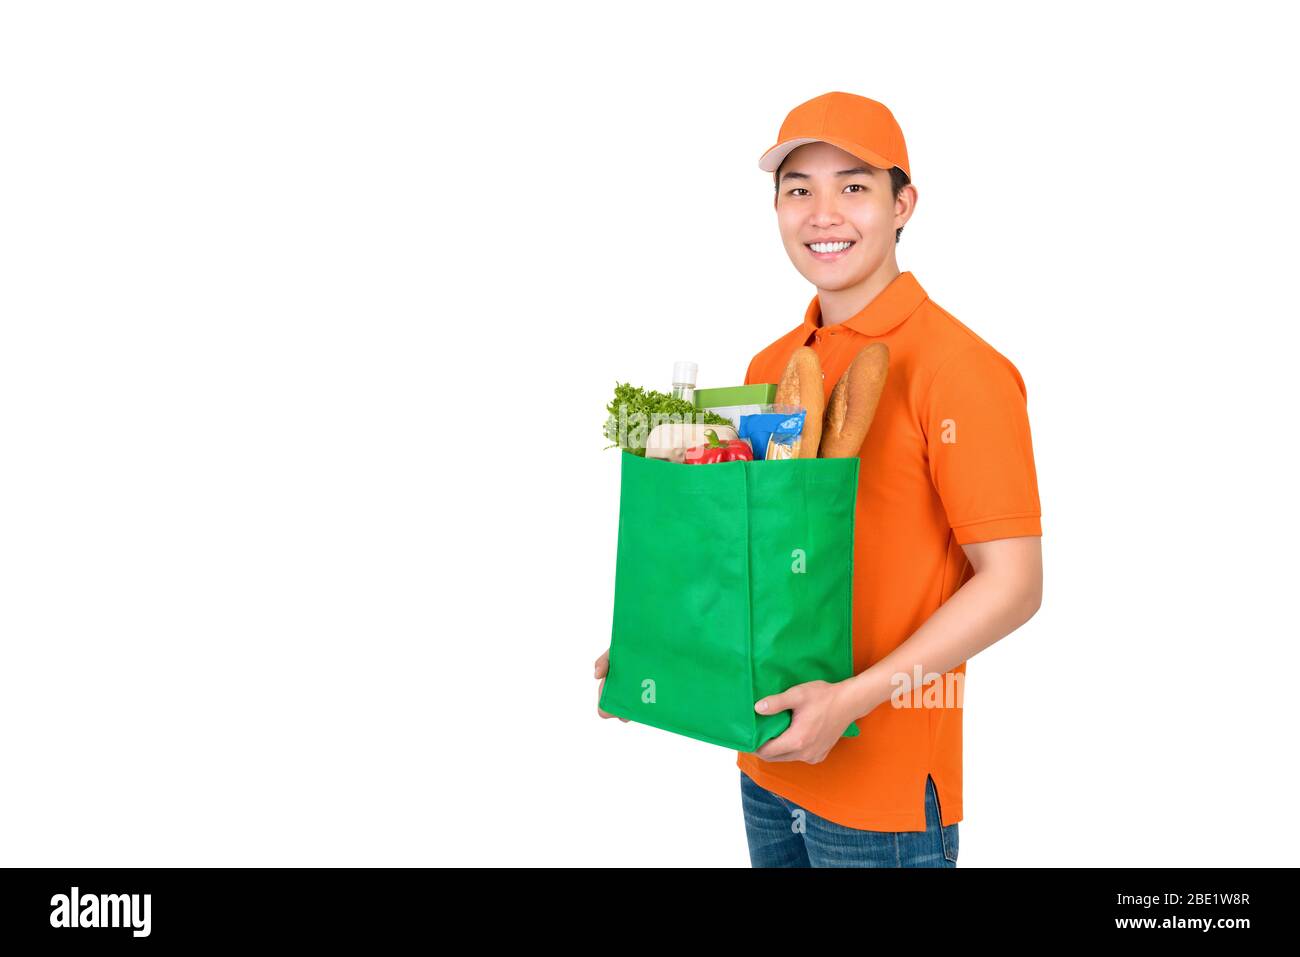 Smiling Asian delivery man carrying groceries shopping bag studio shot isolated on white background Stock Photo